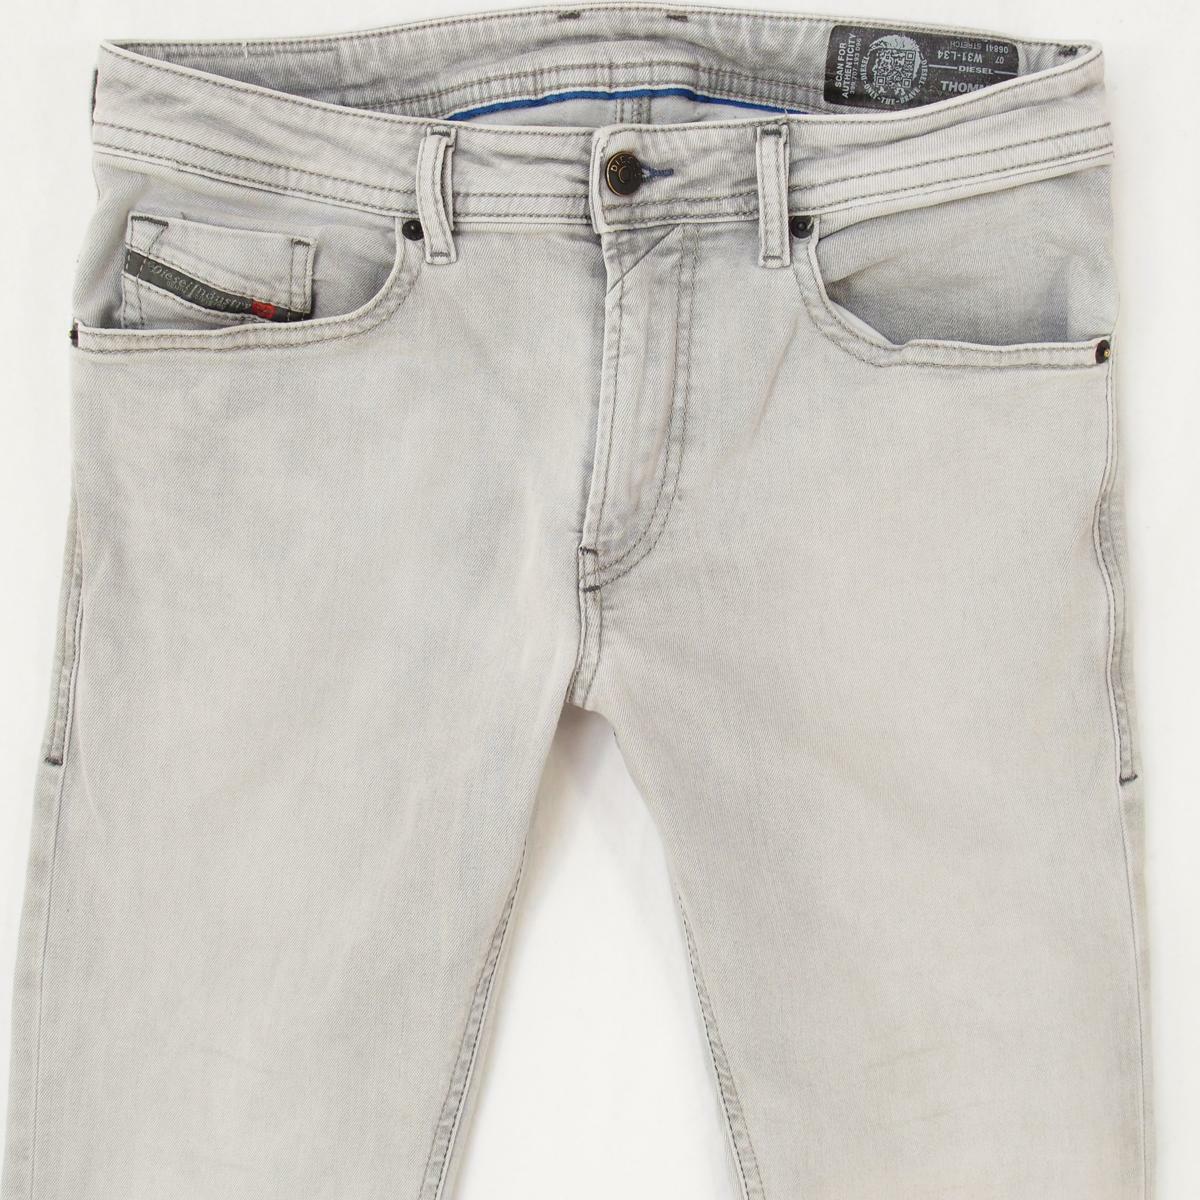 Mens Diesel THOMMER 0684I Stretch Jeans Slim-Skinny W31 Grey Special price for a limited time L34 Max 66% OFF